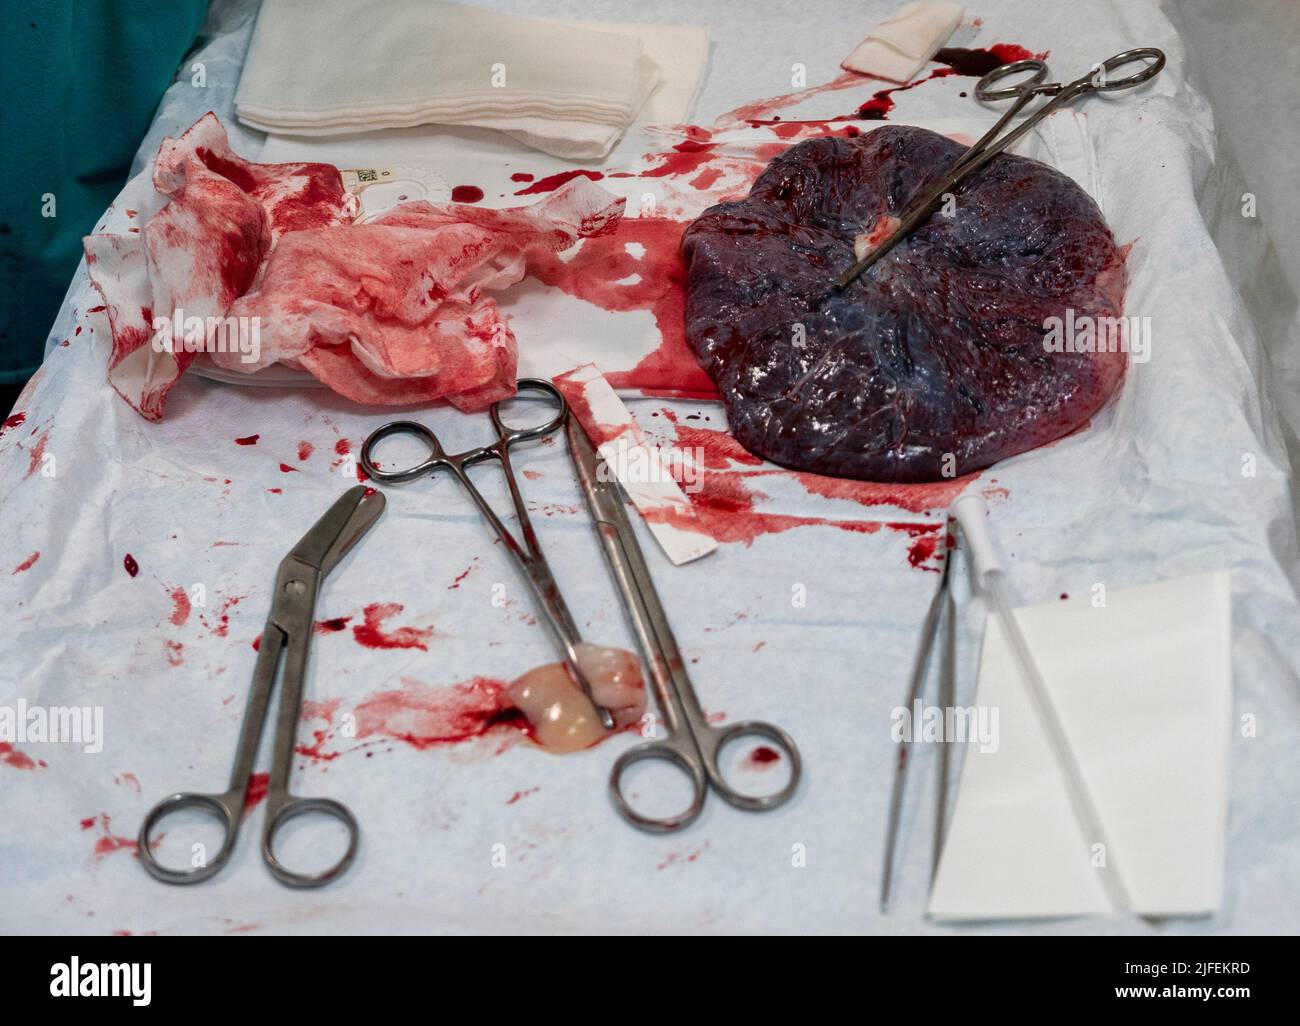 Placenta outside the uterus after childbirth Stock Photo